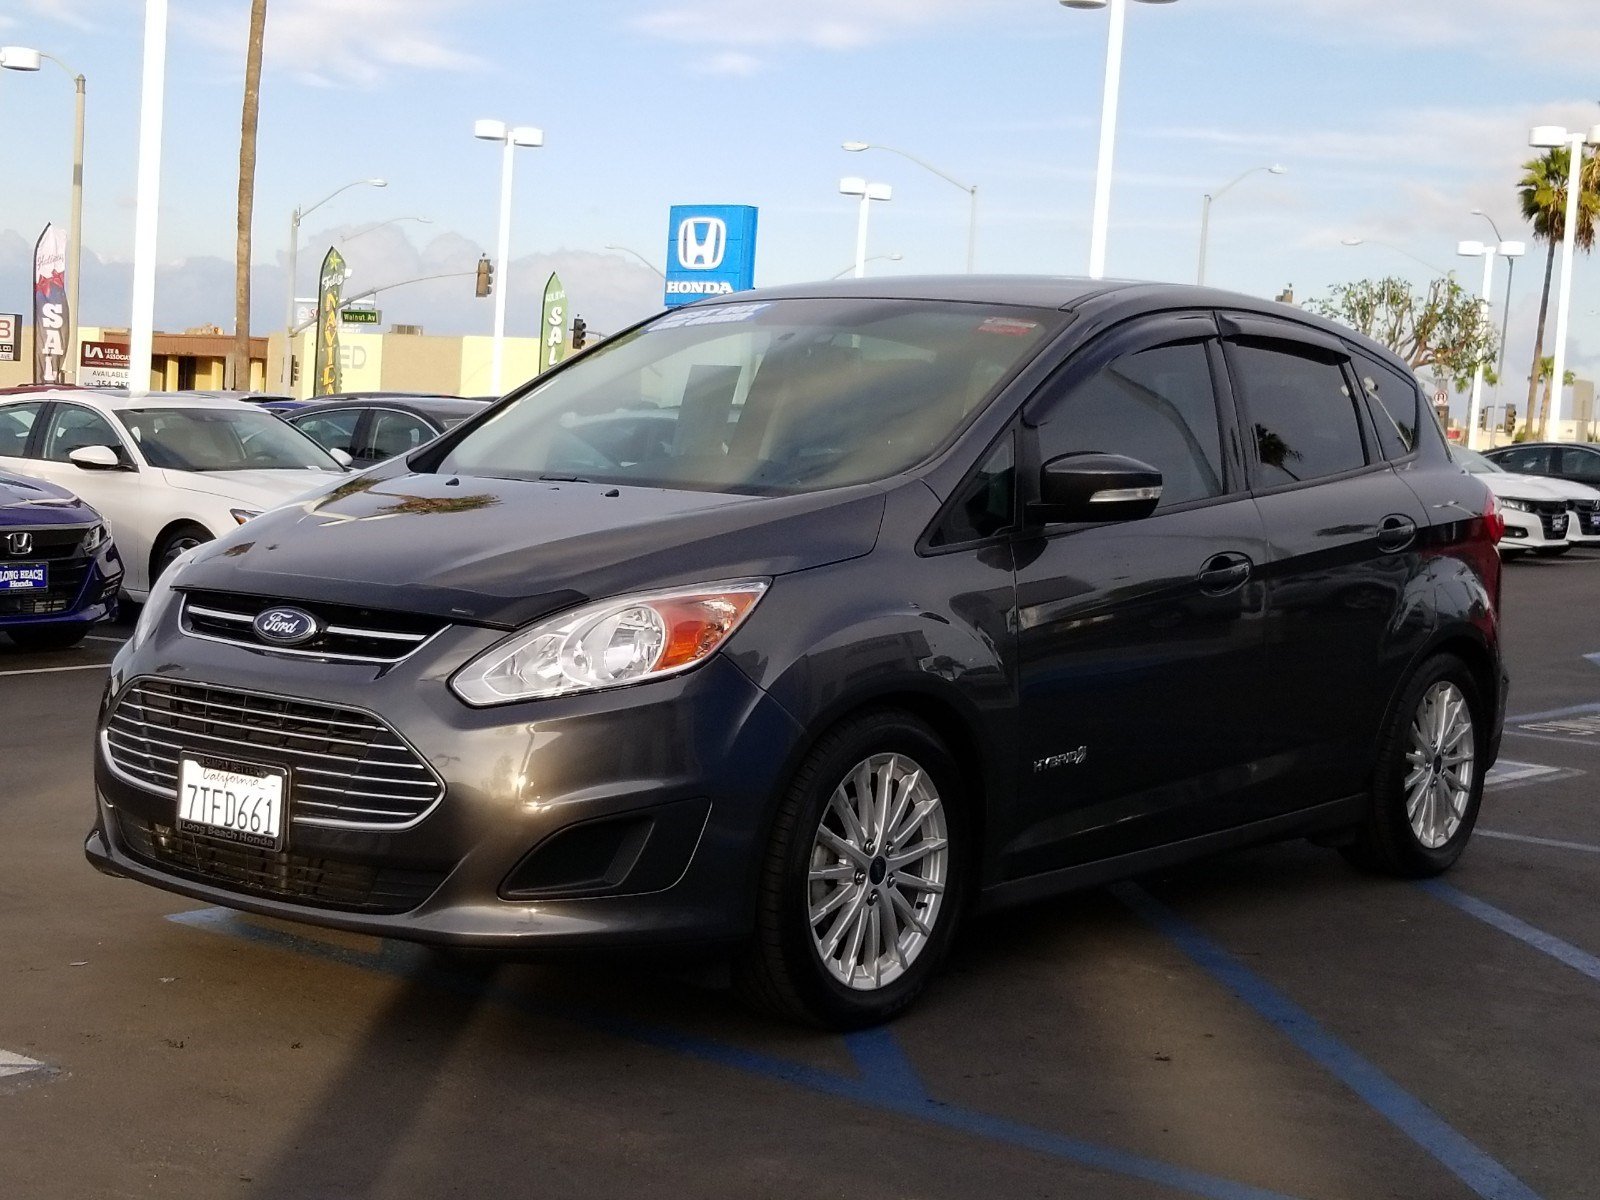 PreOwned 2016 Ford CMax Hybrid SE Hatchback in Signal